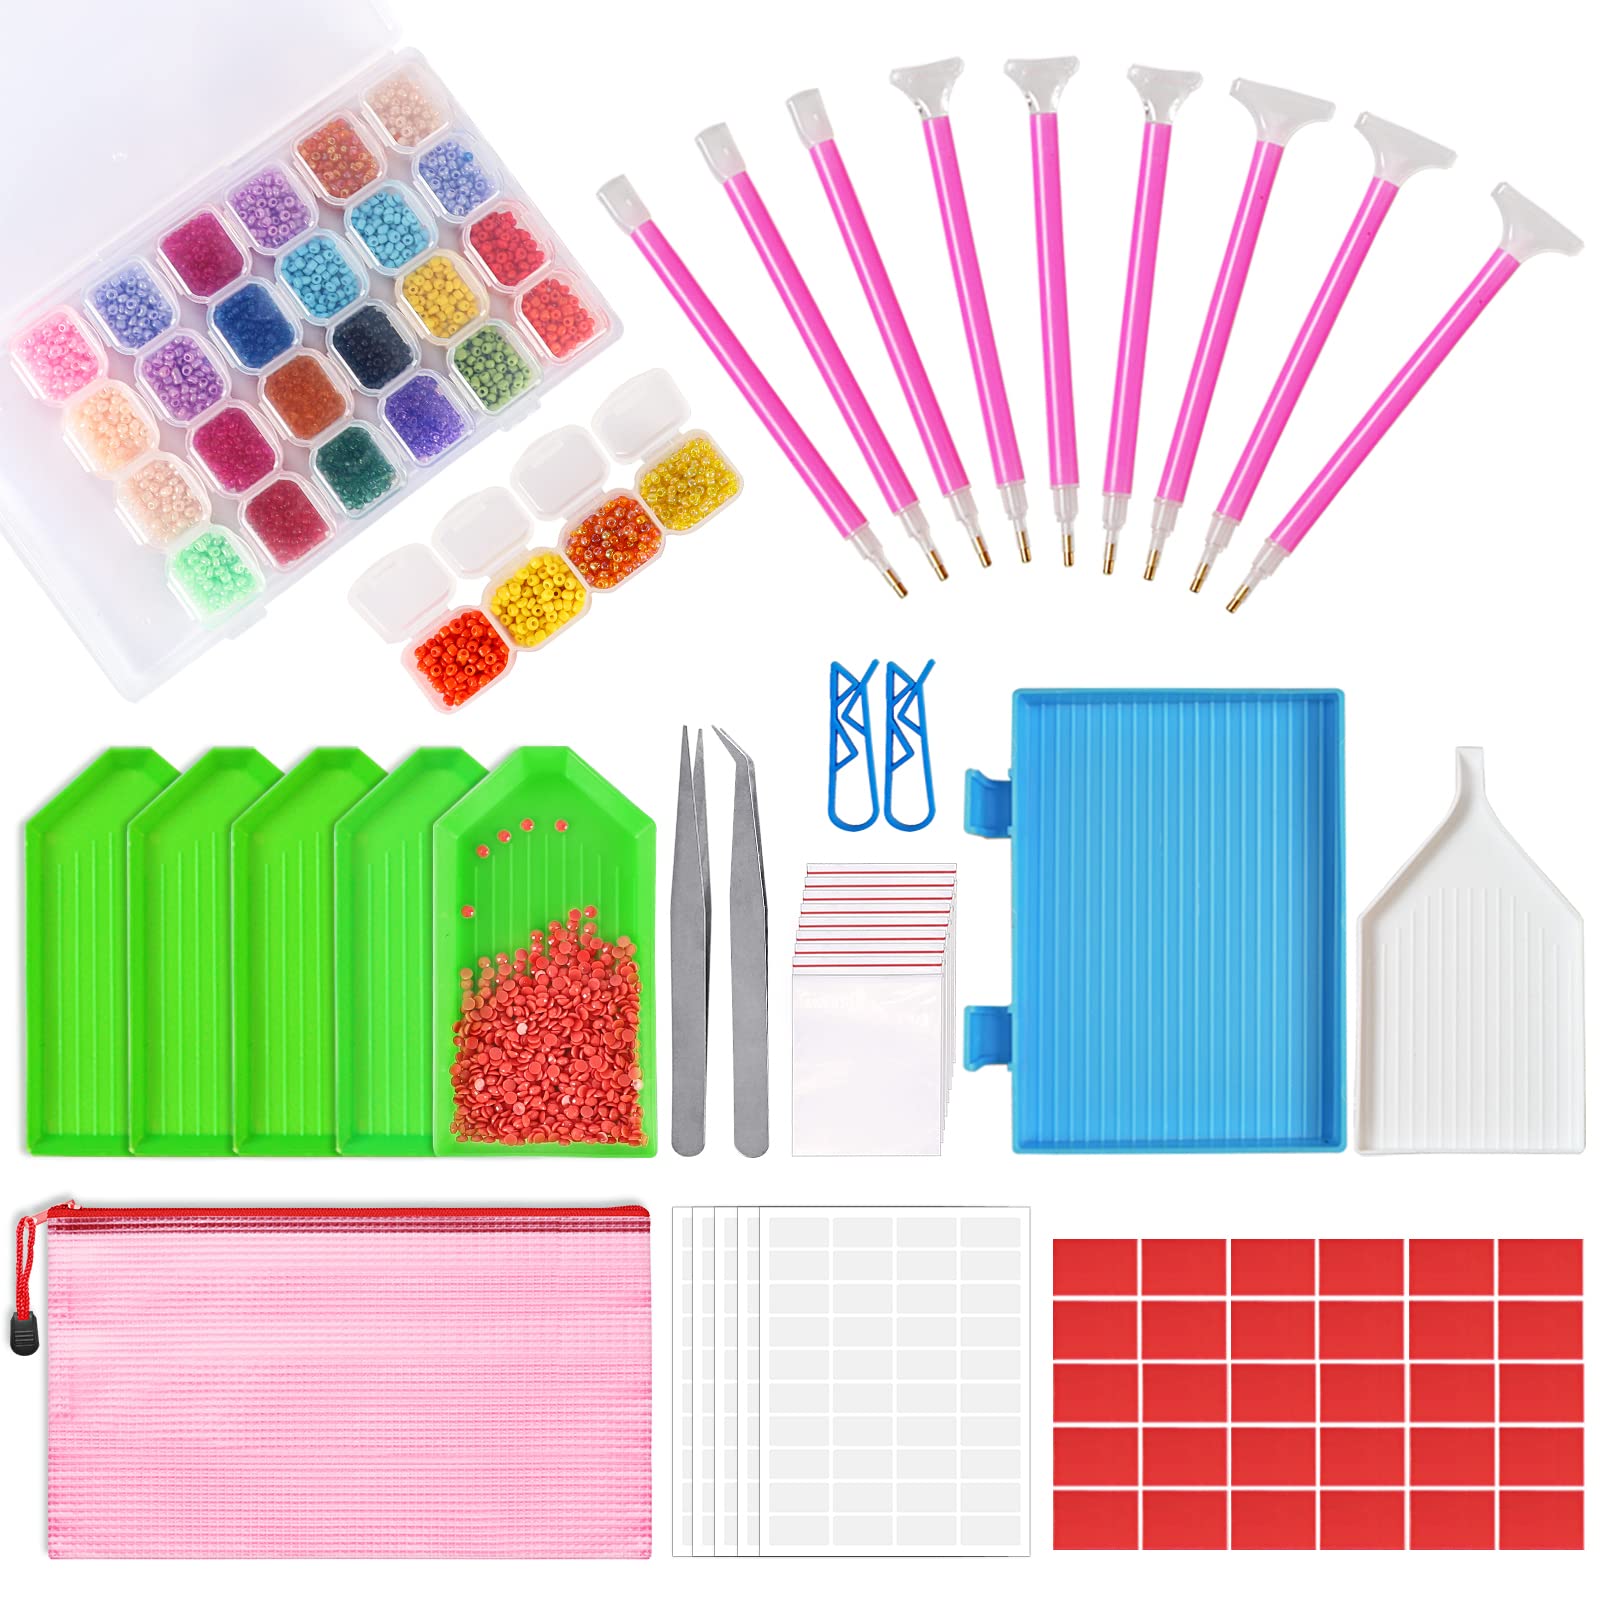 OUTUXED 117pcs 5D DIY Diamond Painting Tools and Accessories Kits with  Diamond Embroidery Box and Multiple Sizes Painting Pens for Adults to Make  Art Craft